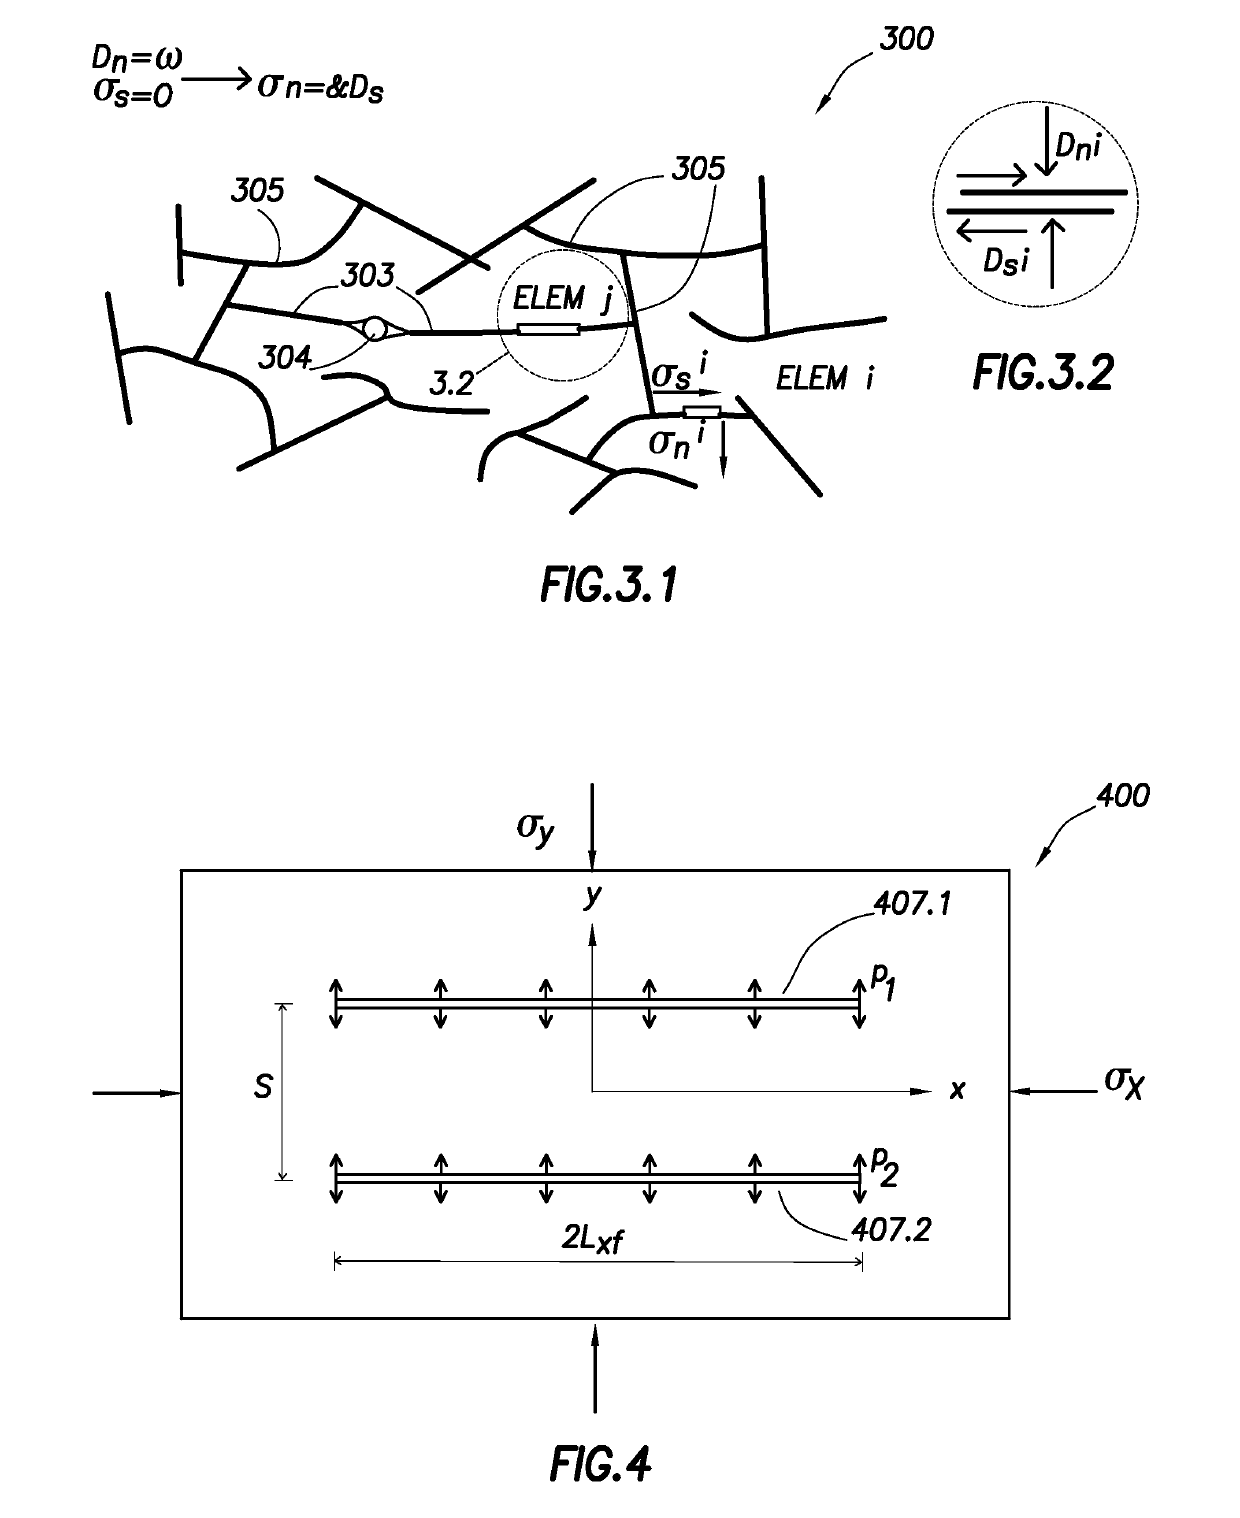 Method of calibrating fracture geometry to microseismic events